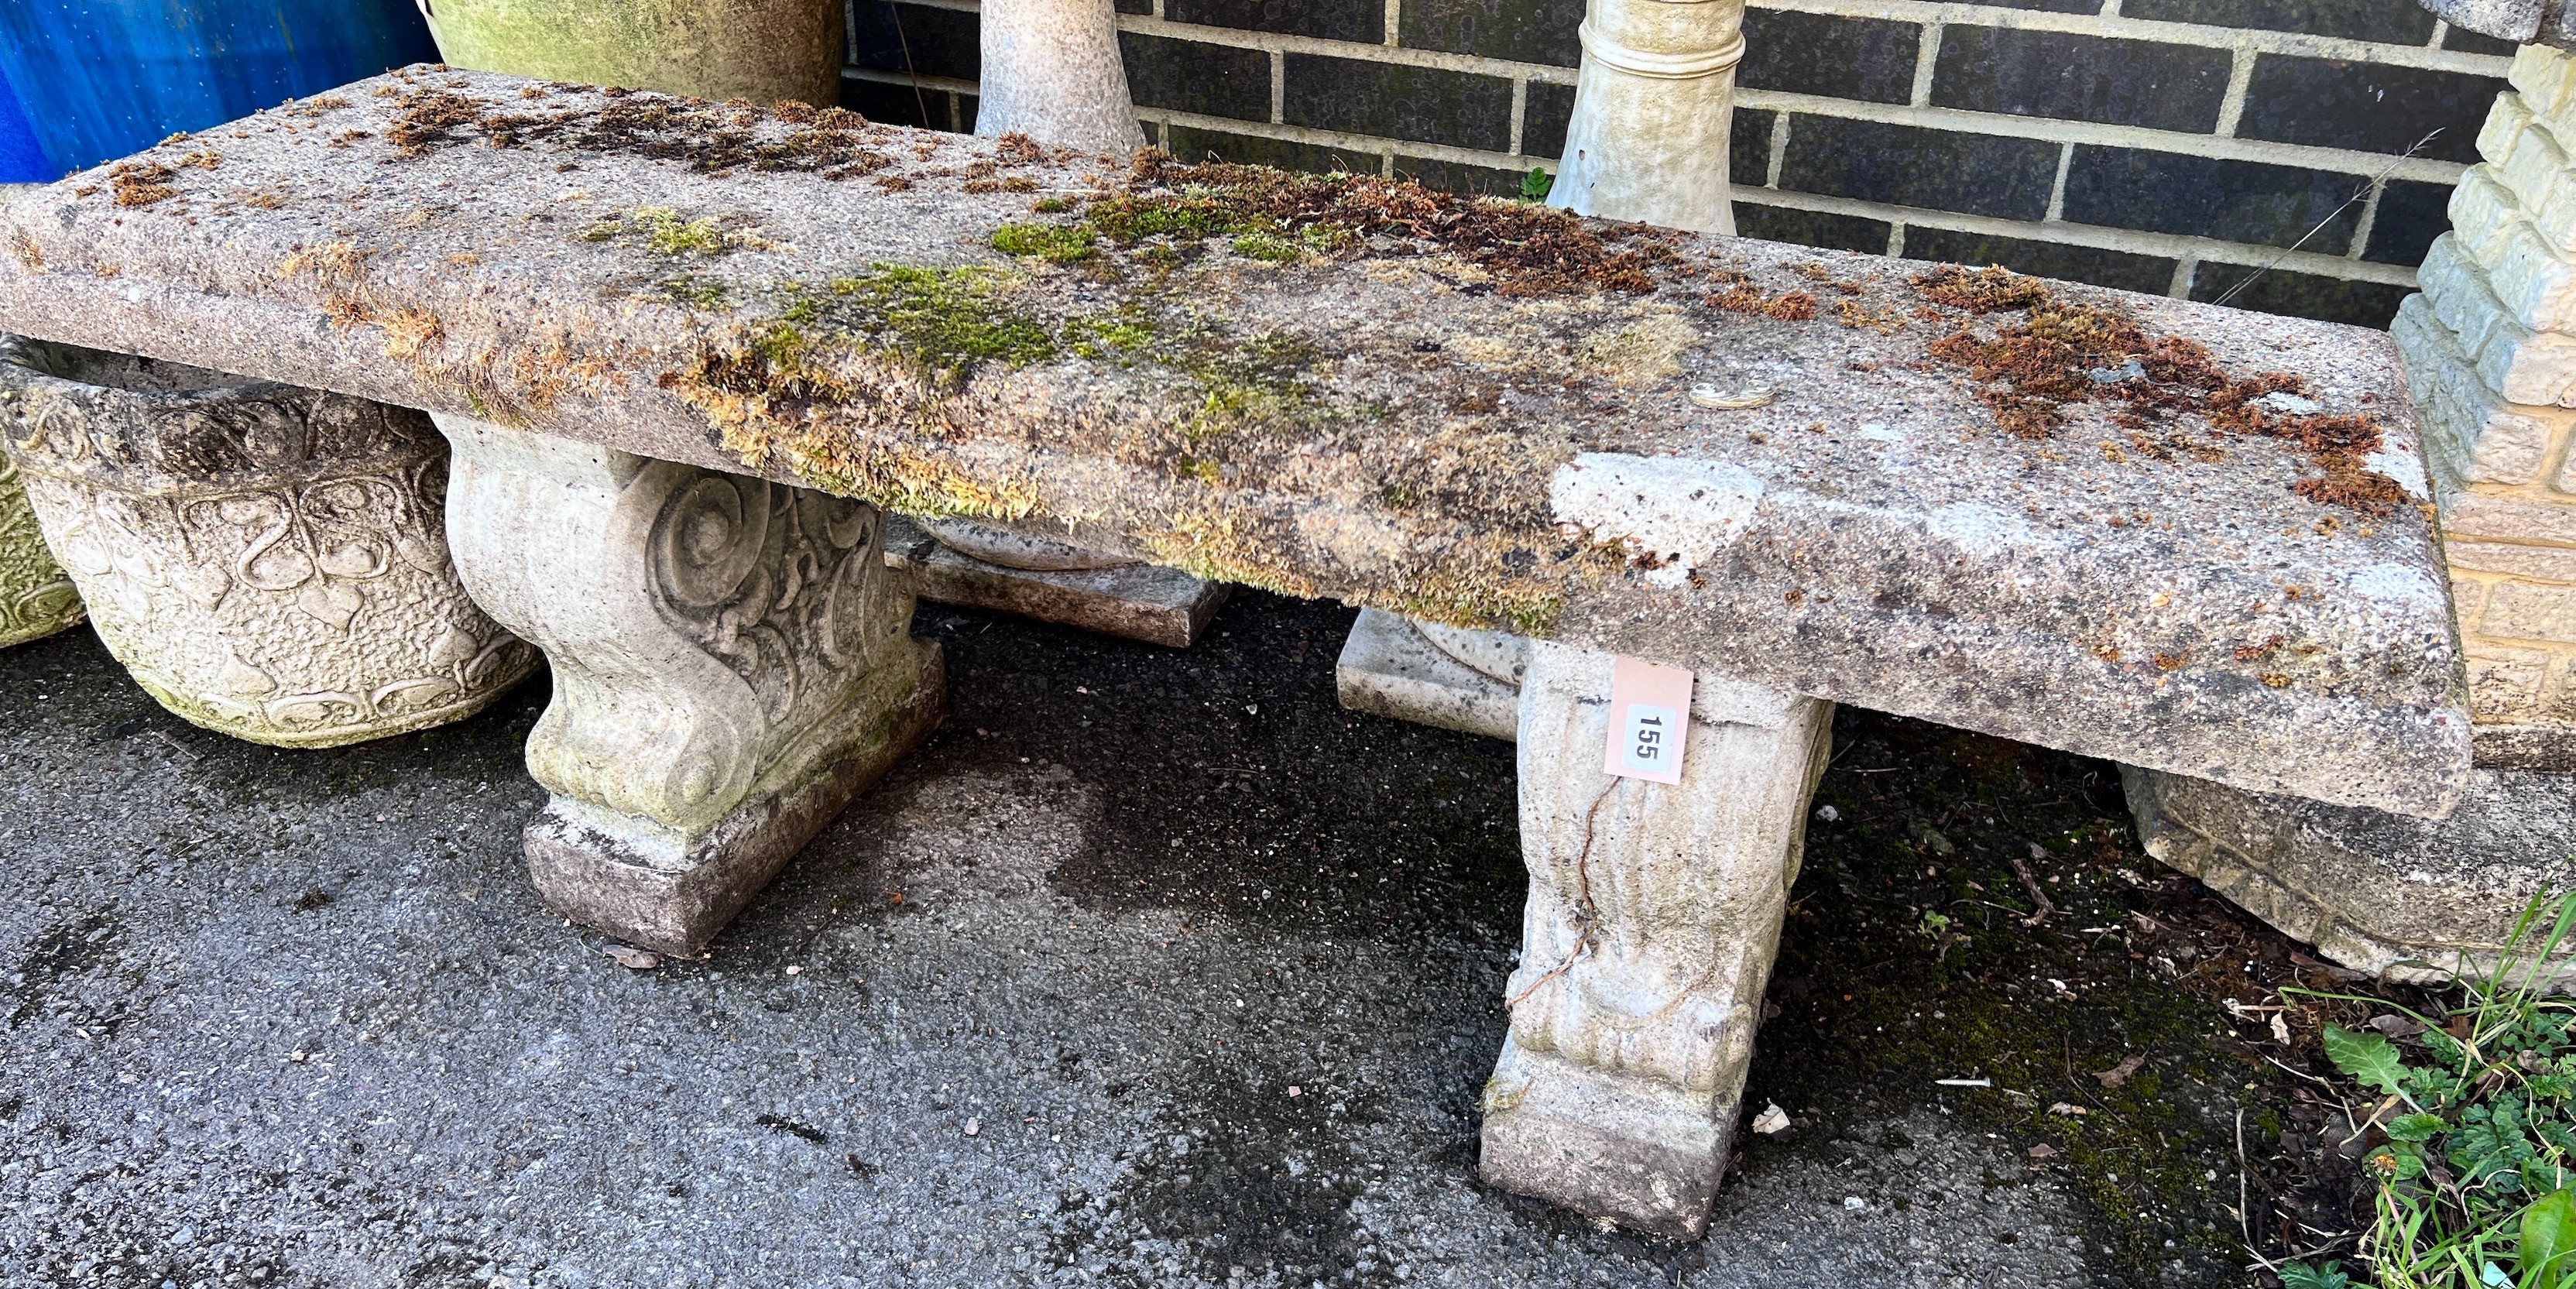 A reconstituted stone garden bench, length 128cm, depth 37cm, height 45cm *Please note the sale commences at 9am.